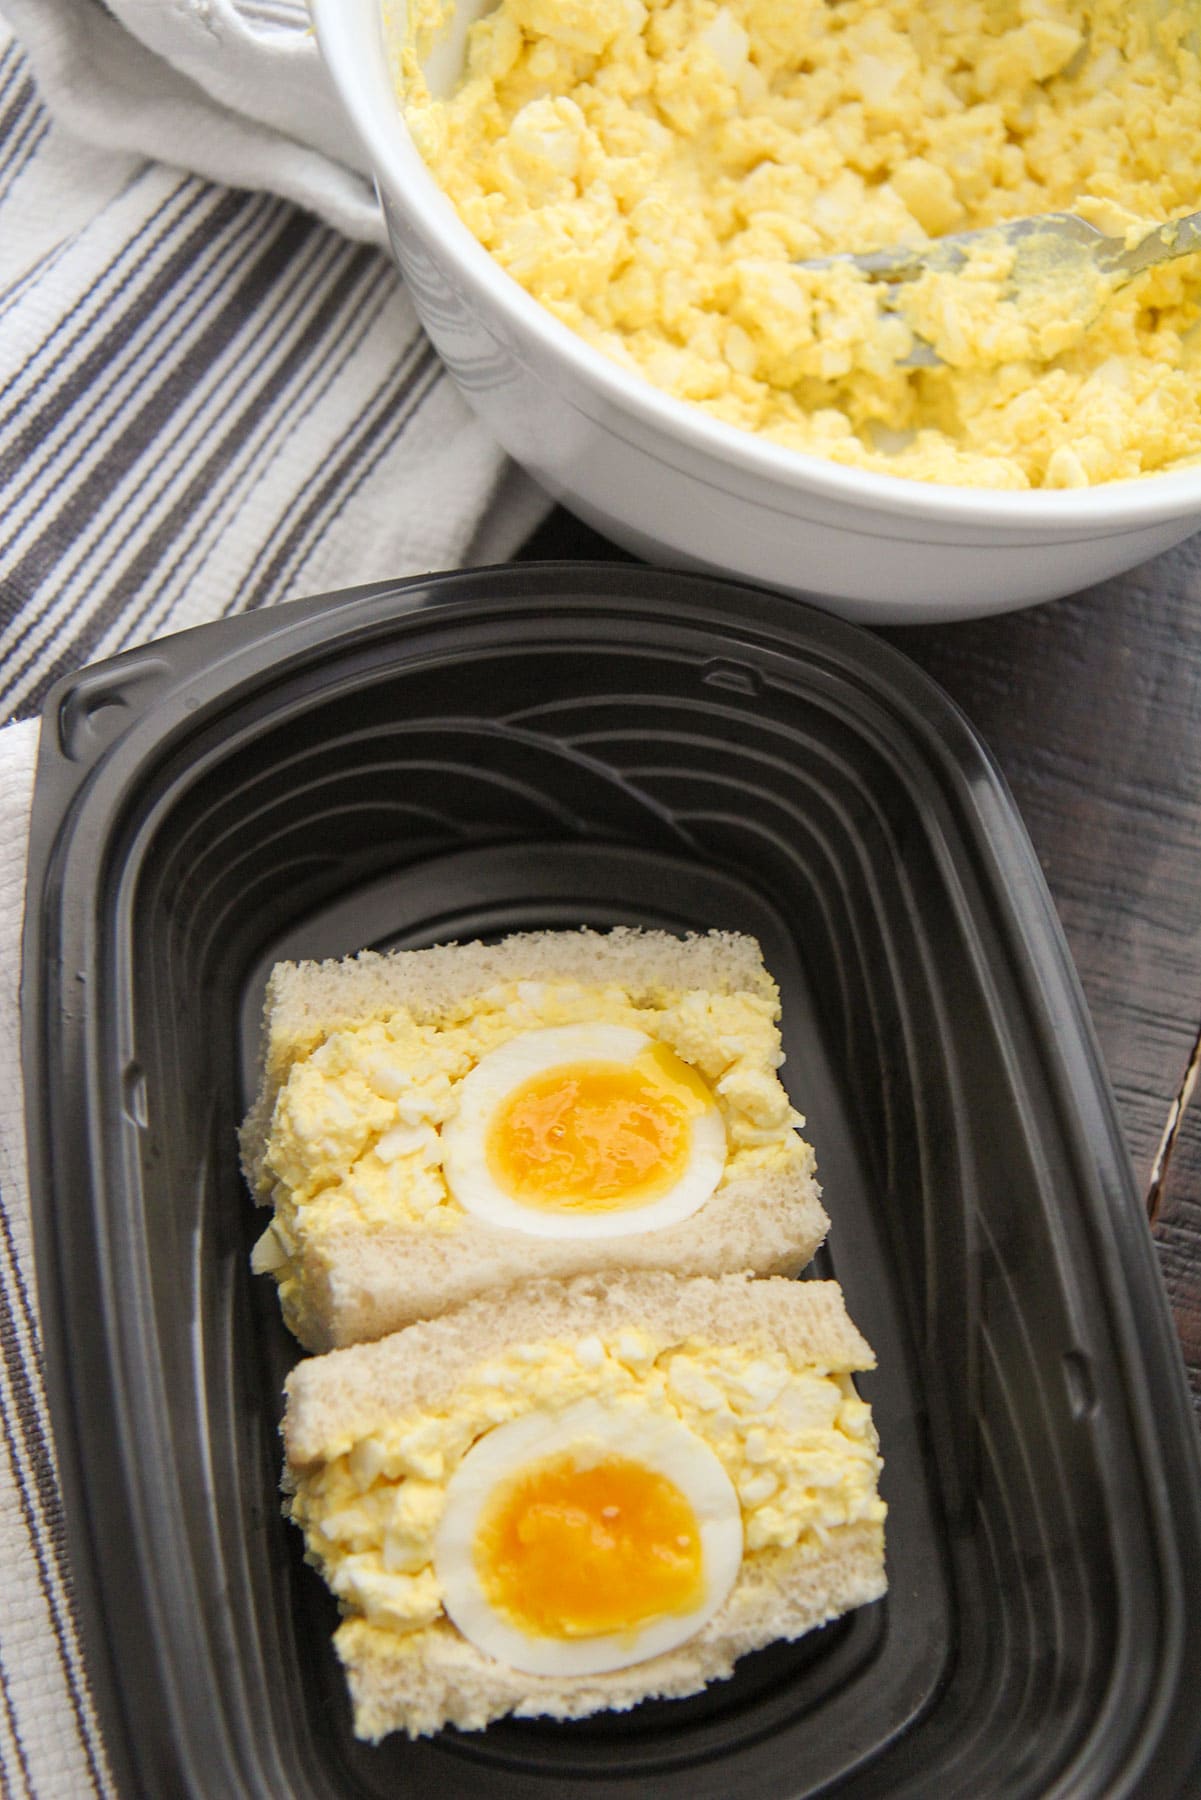 Japanese egg salad sandwiches in a black container with a bowl of egg salad in the background.